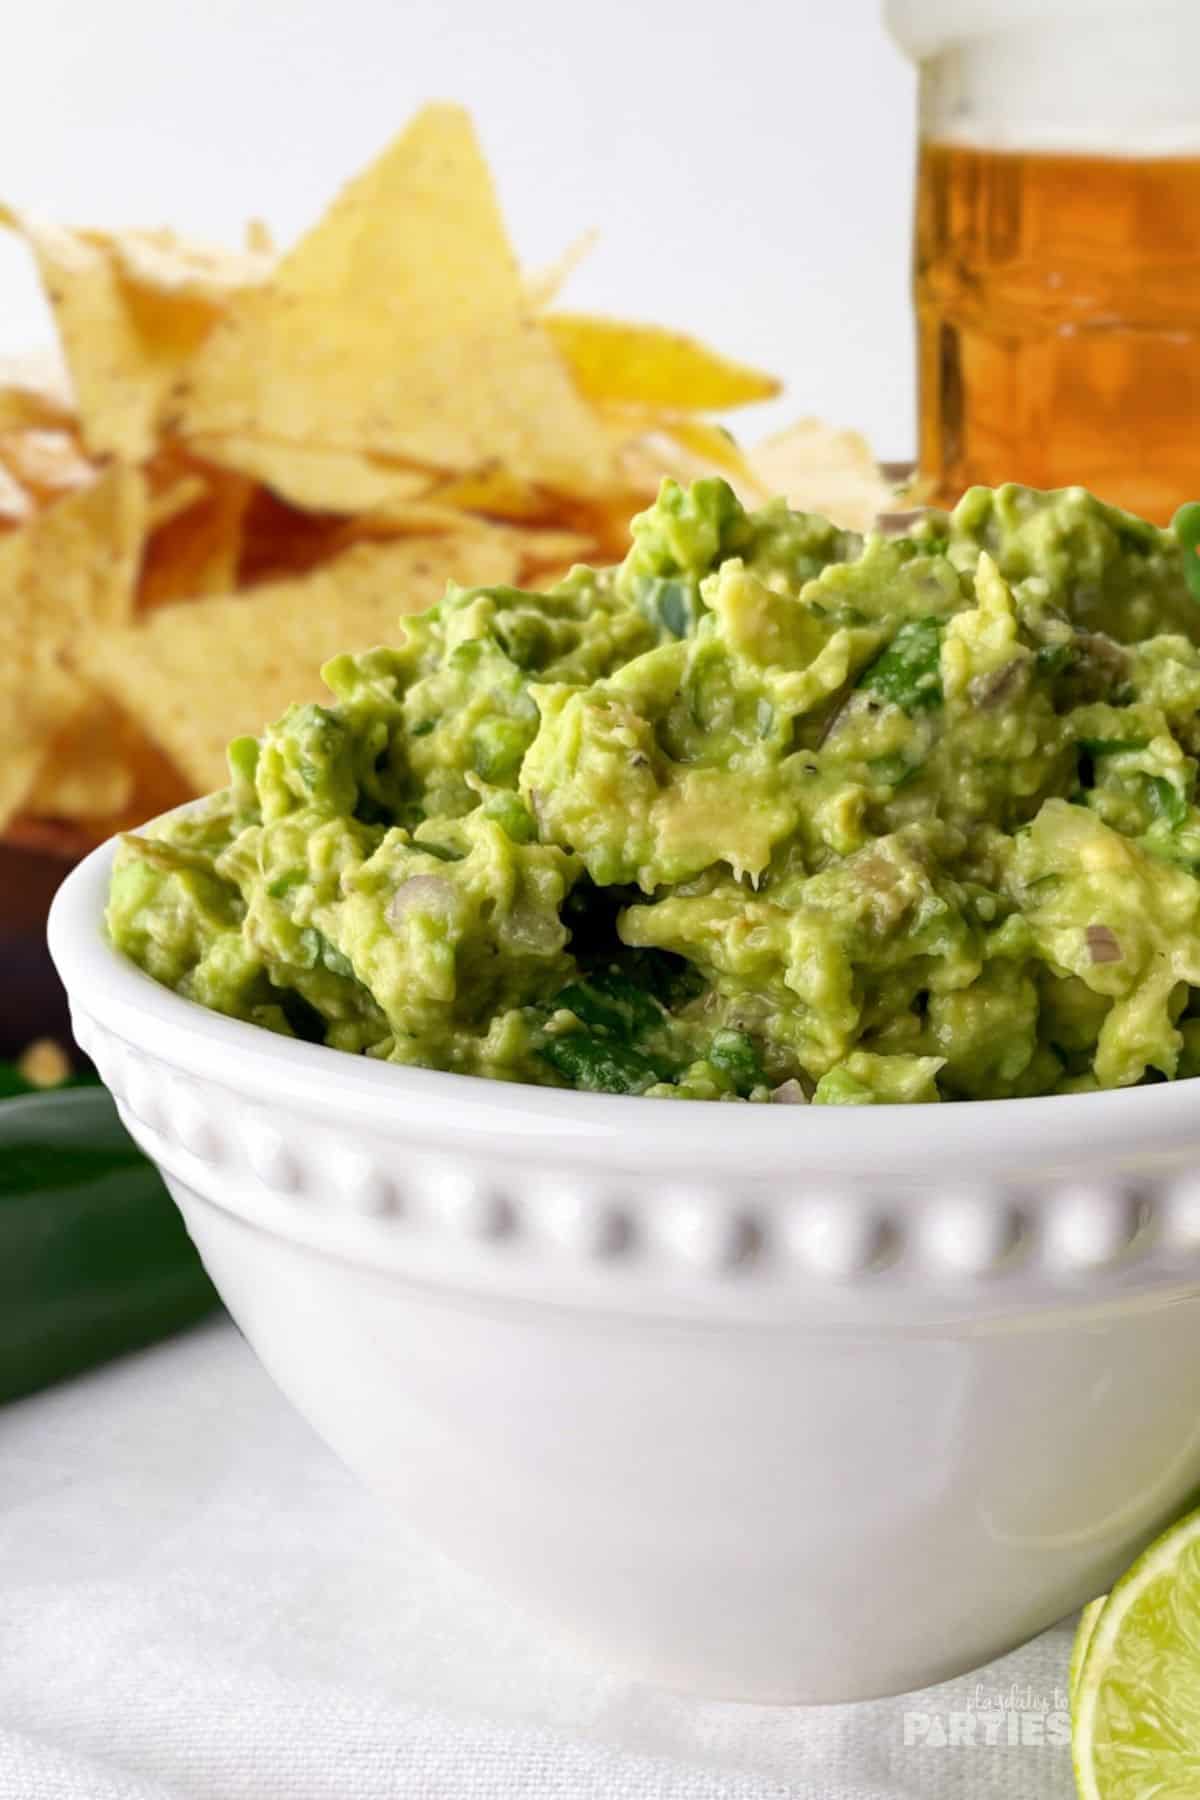 A bowl of avocado dip in front of tortilla chips and a beer